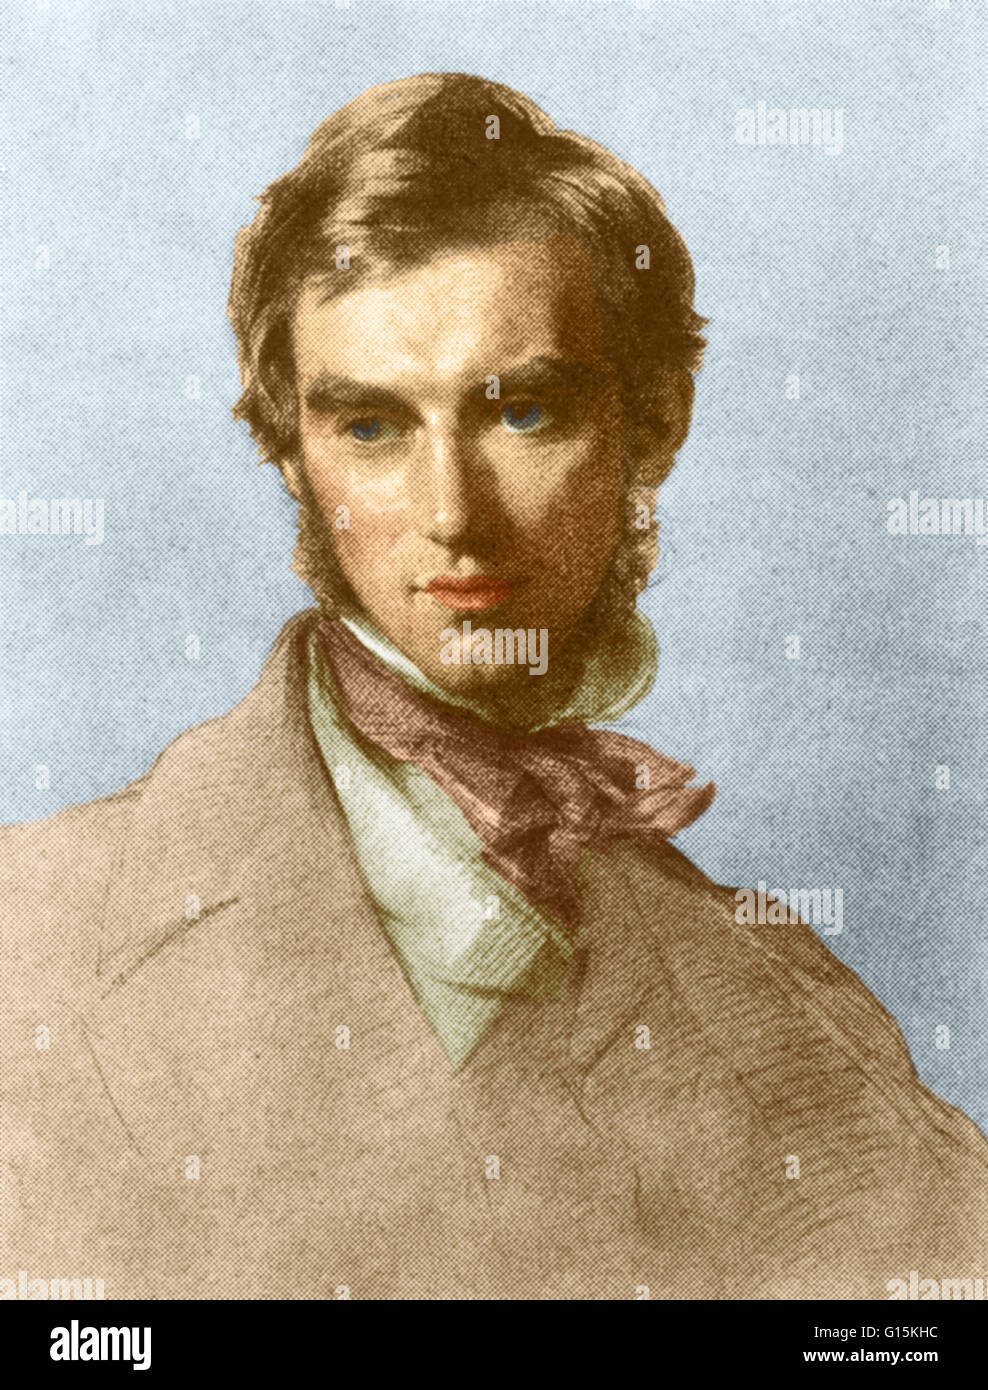 Color enhanced portrait of Joseph Dalton Hooker (1817-1911), one of the greatest British botanists and explorers of the 19th century. Hooker was a founder of geographical botany, and Charles Darwin's closest friend and confidant. He was Director of the Ro Stock Photo